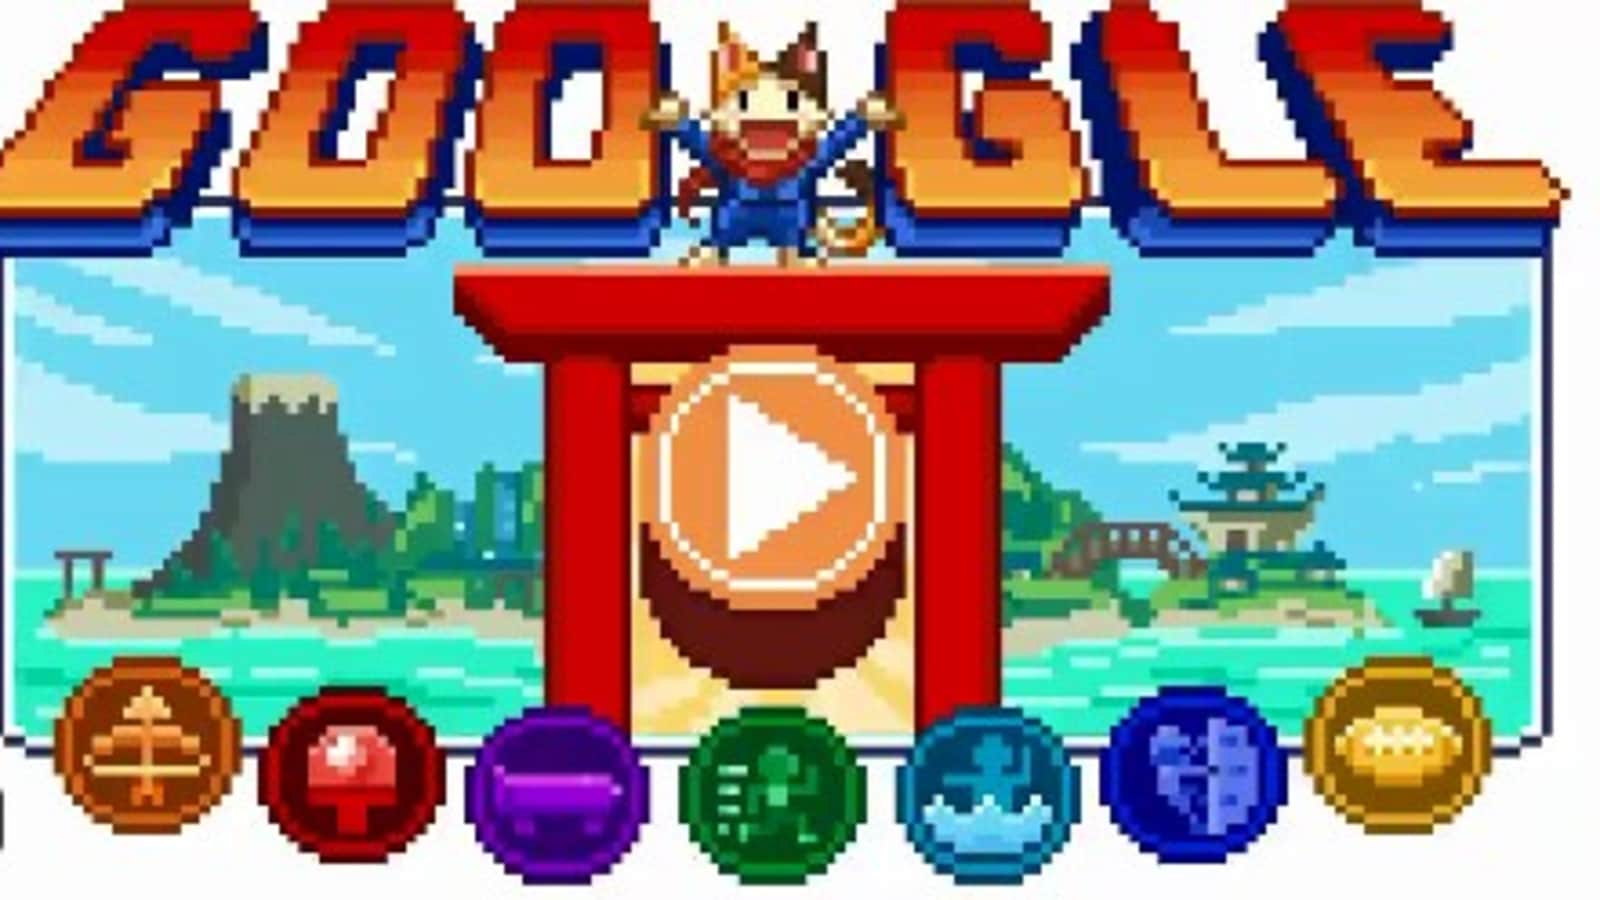 Google launches Doodle Champion Island Games to celebrate Tokyo